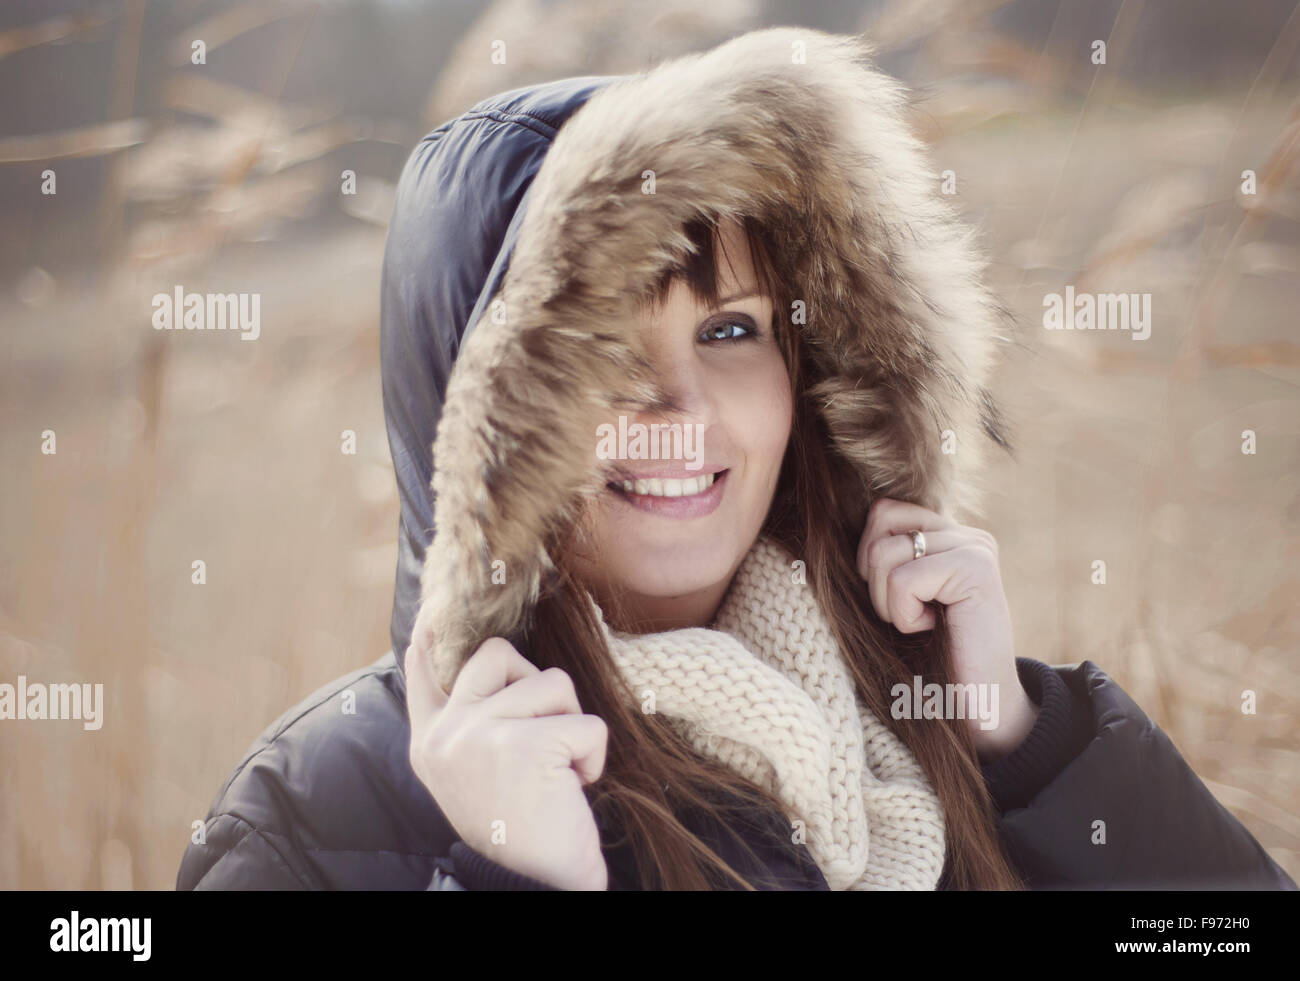 Portrait of woman with hood on in autumn country Stock Photo